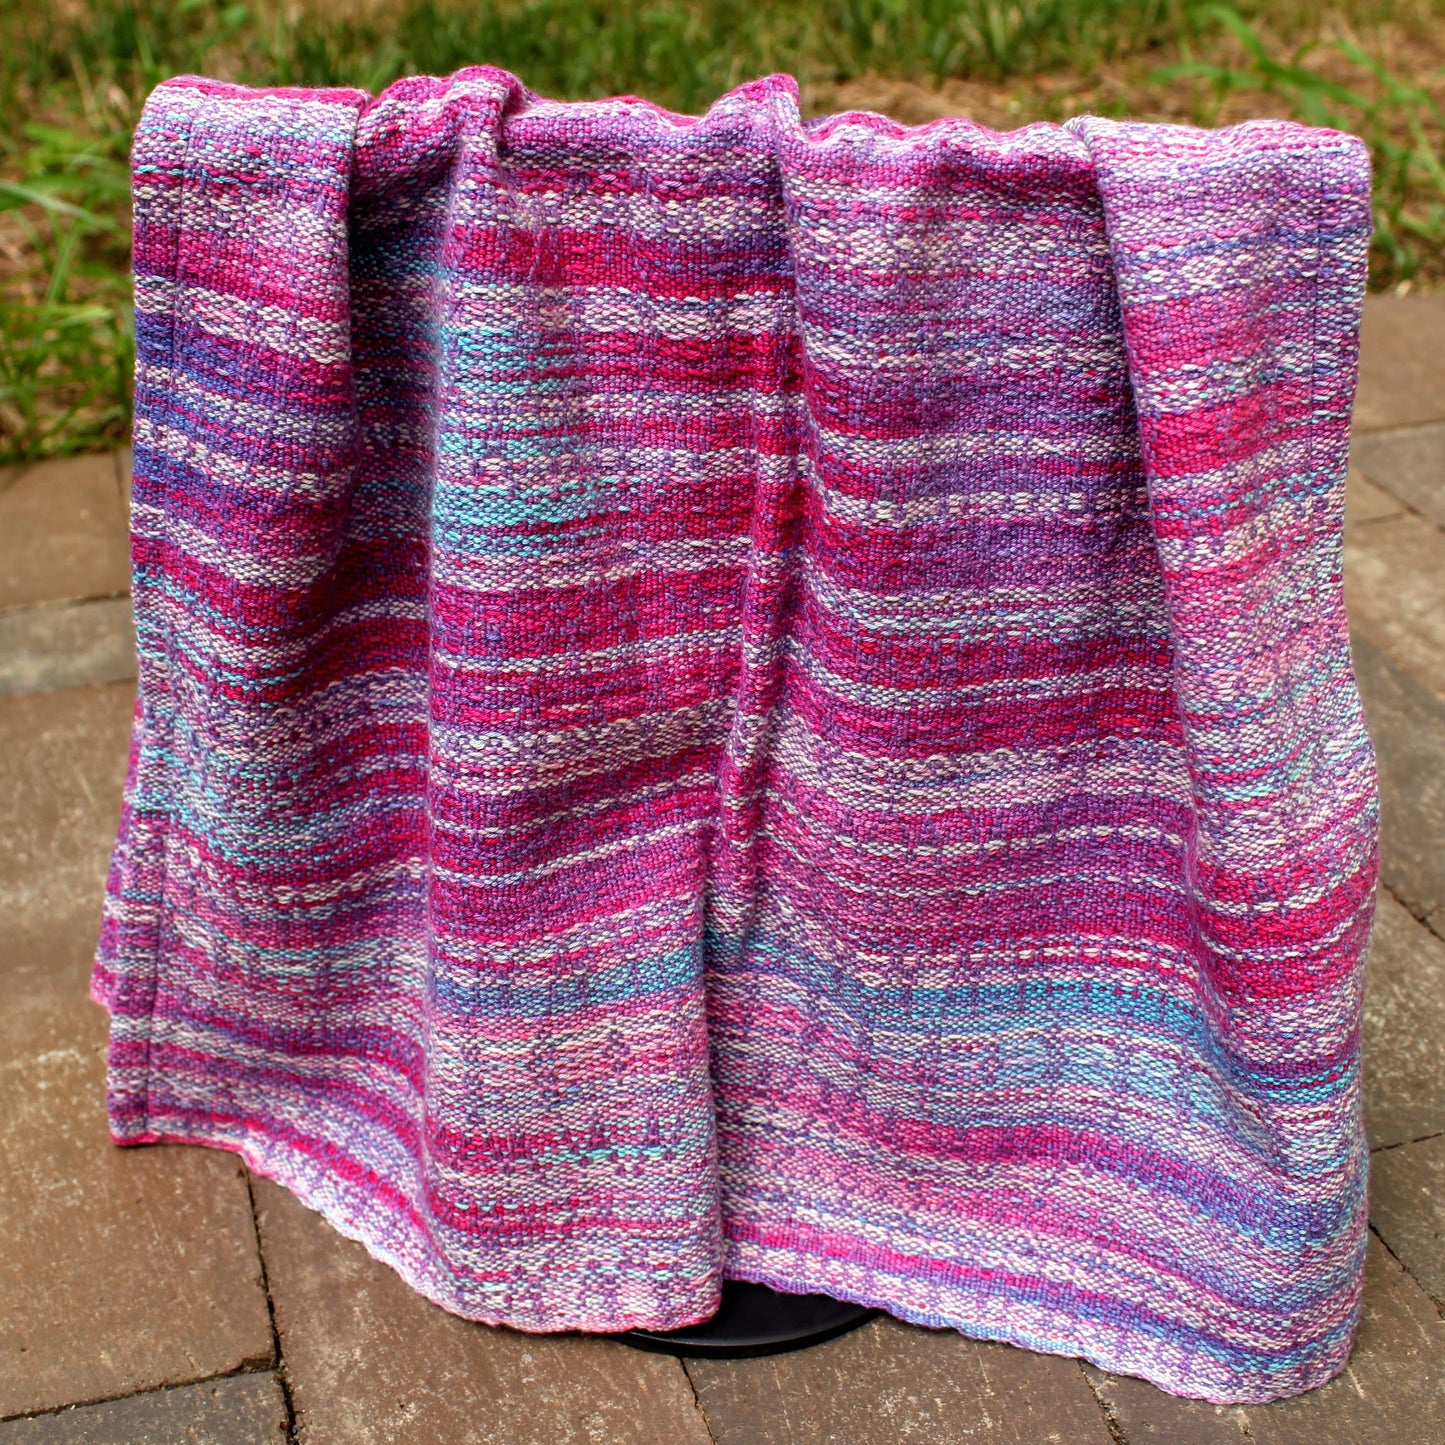 Handwoven Towel - "Cotton Candy"